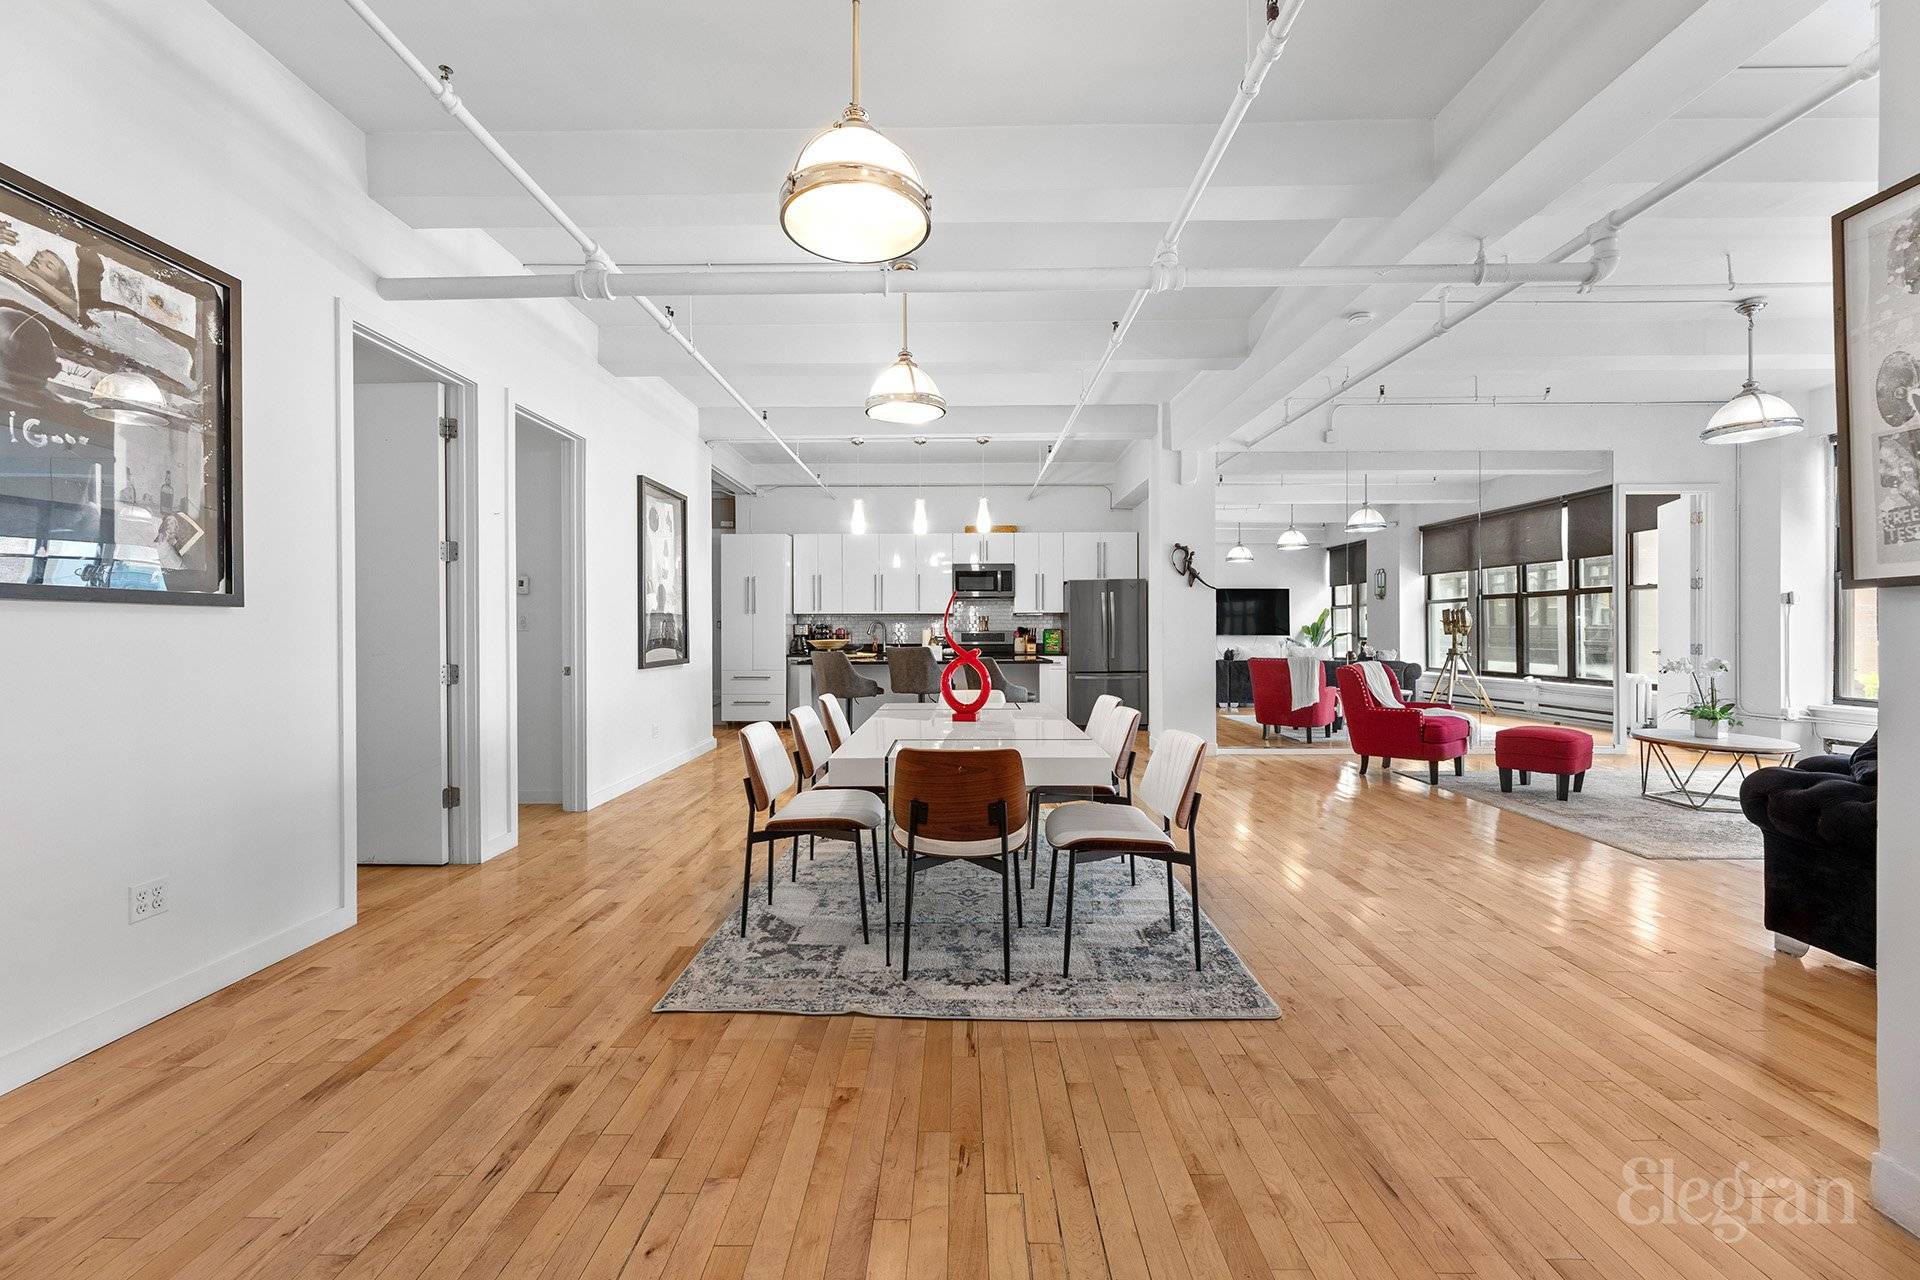 Step into Whitewood, a 2, 900 sqft 3 bedroom 2 bathroom loft located in the heart of Chelsea.